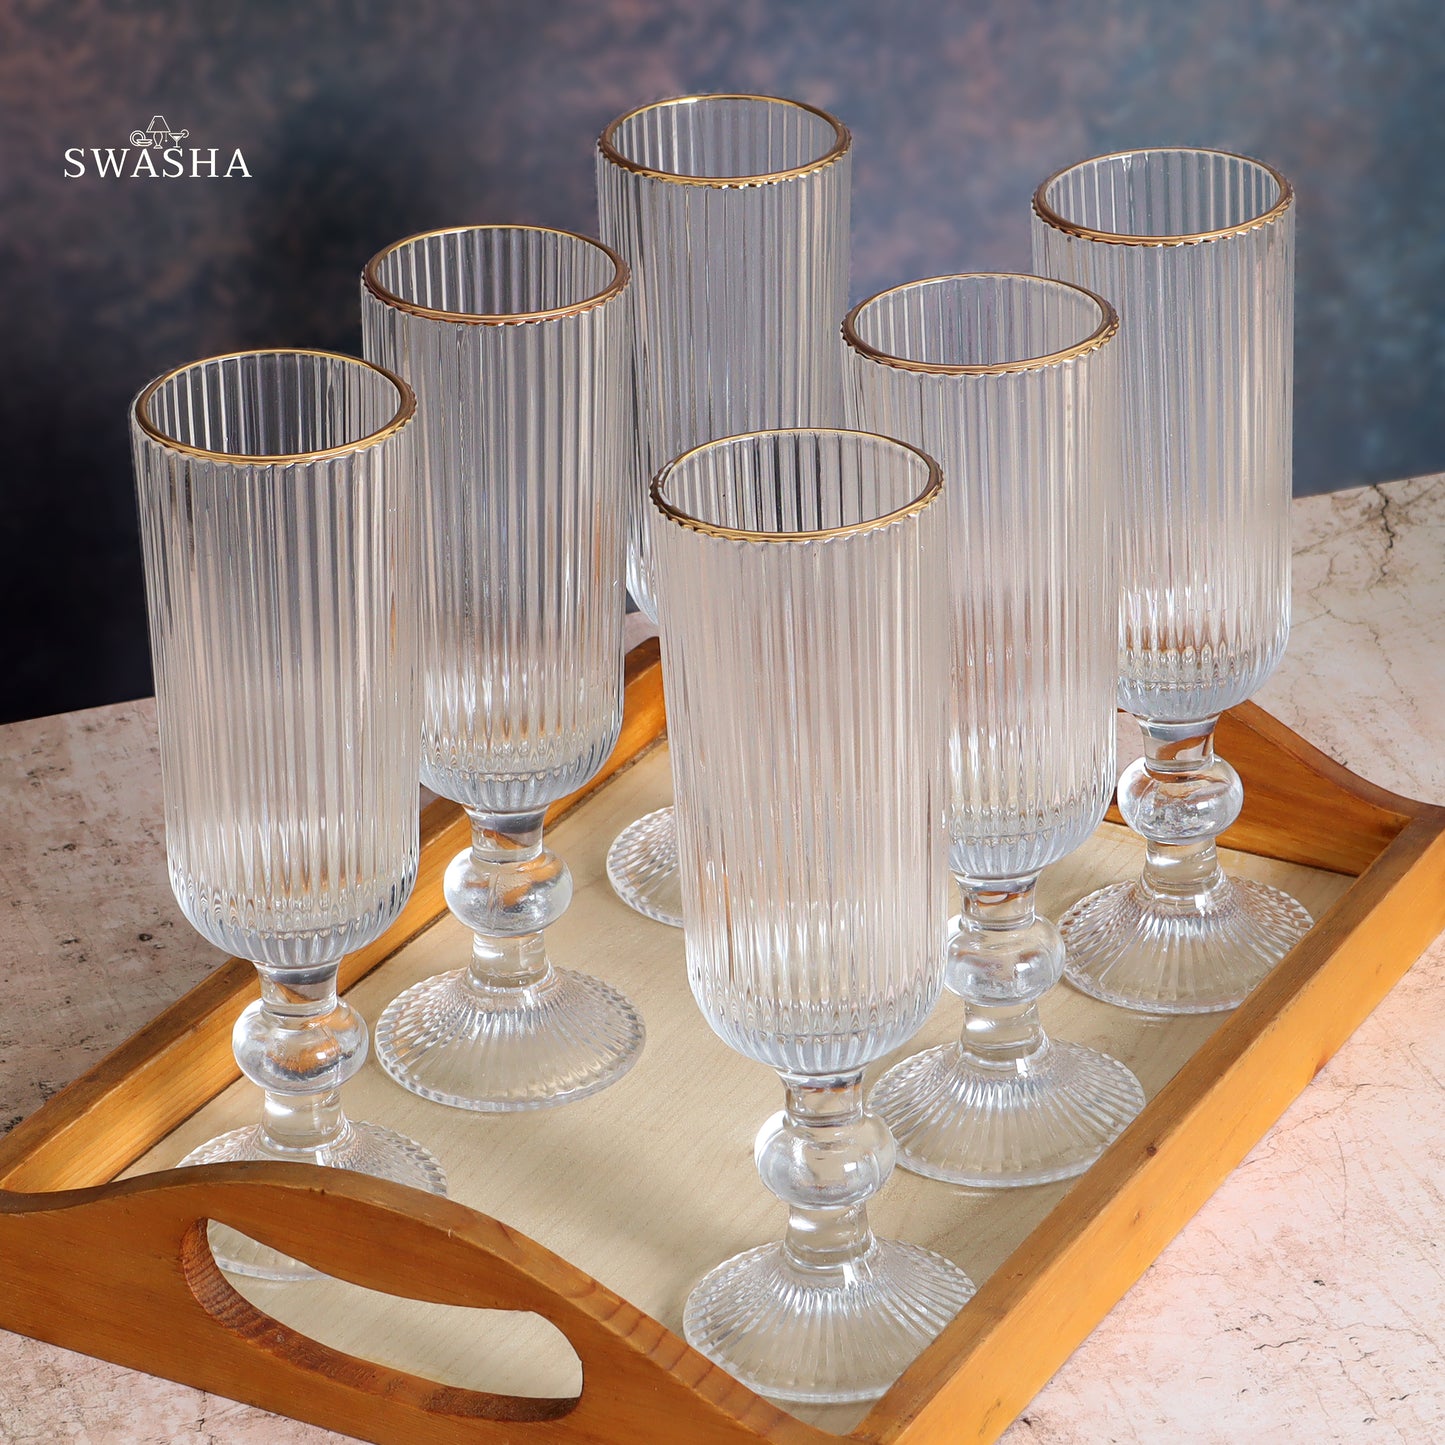 Set of 6 elegant champagne glasses - perfect for celebratory toasts and occasions